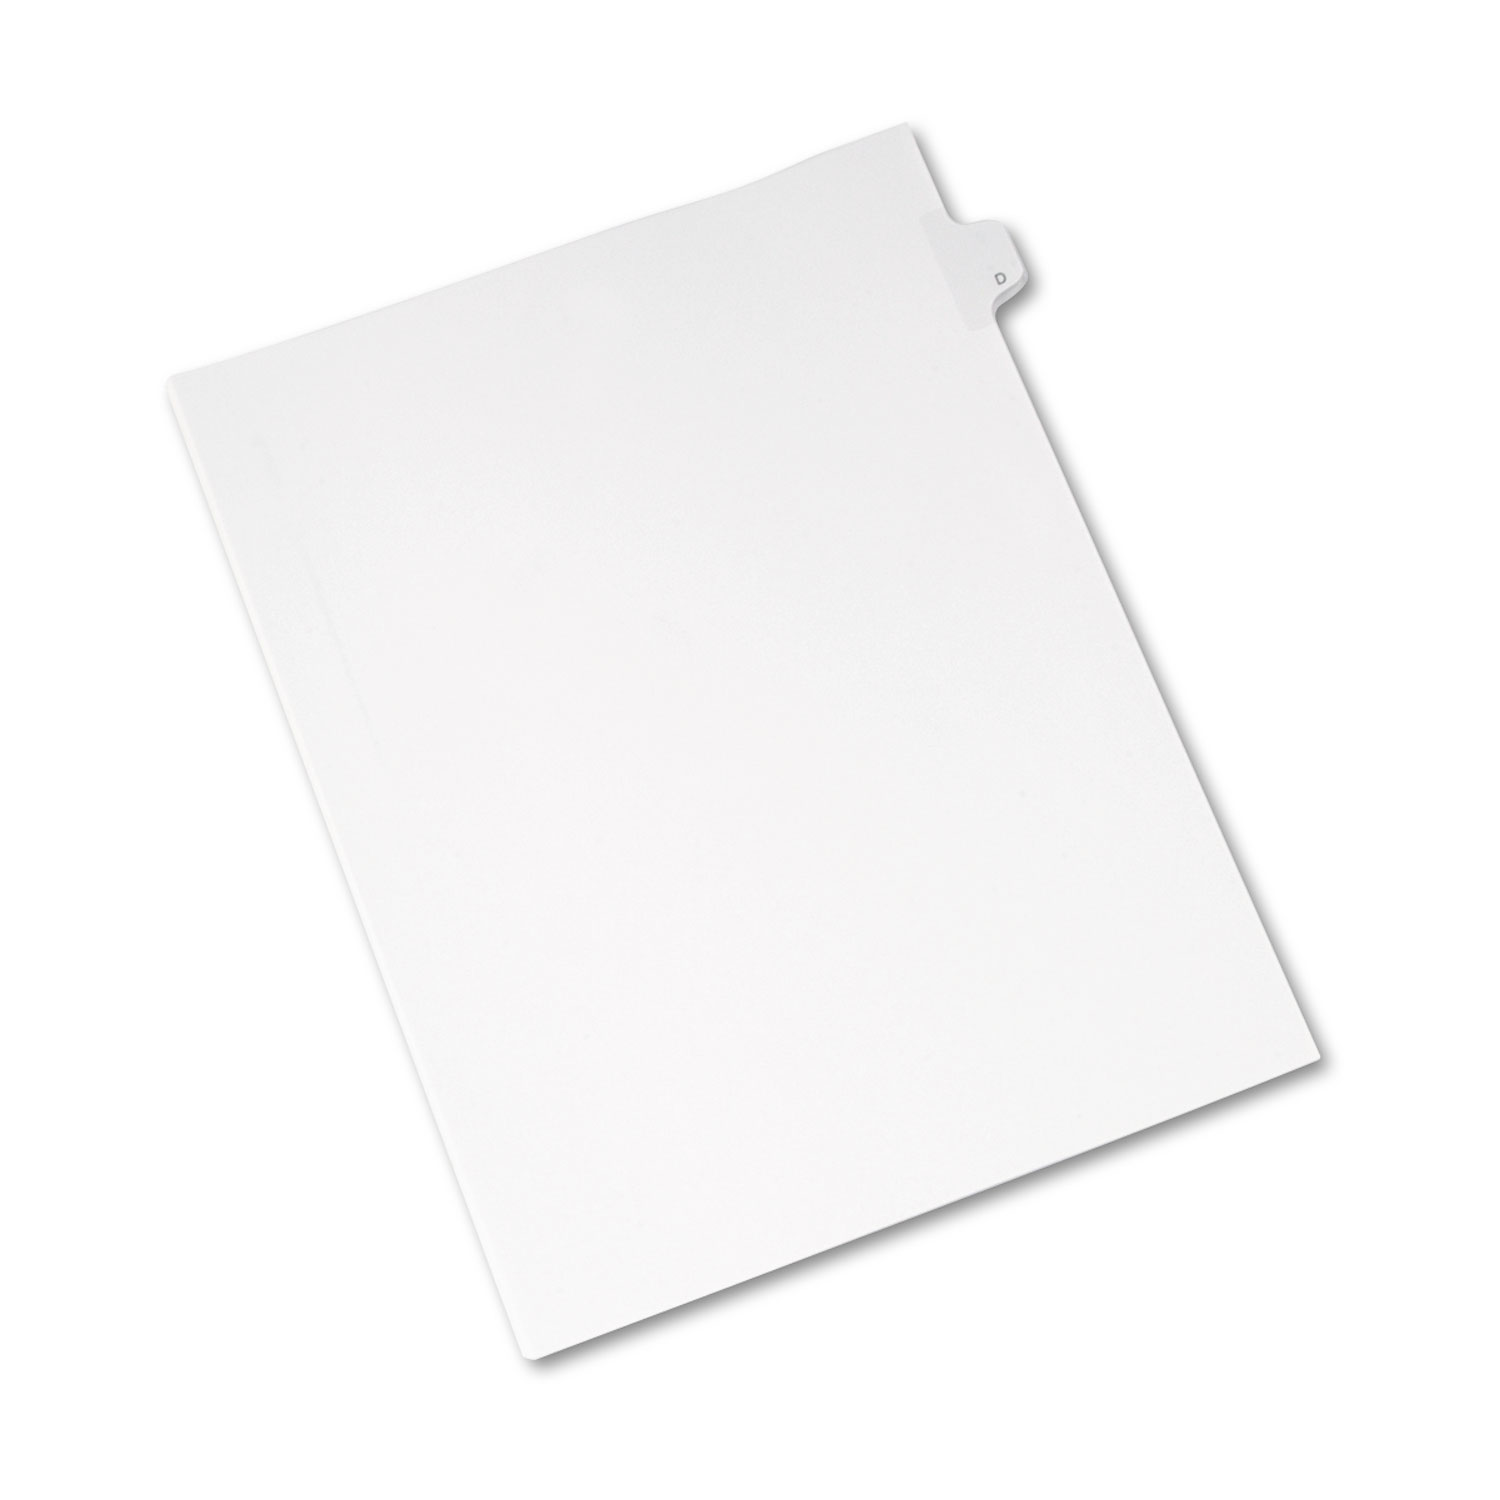 Avery AVE82166 Allstate-Style Legal Exhibit Side Tab Divider, Title: D, Letter, White, 25/Pack